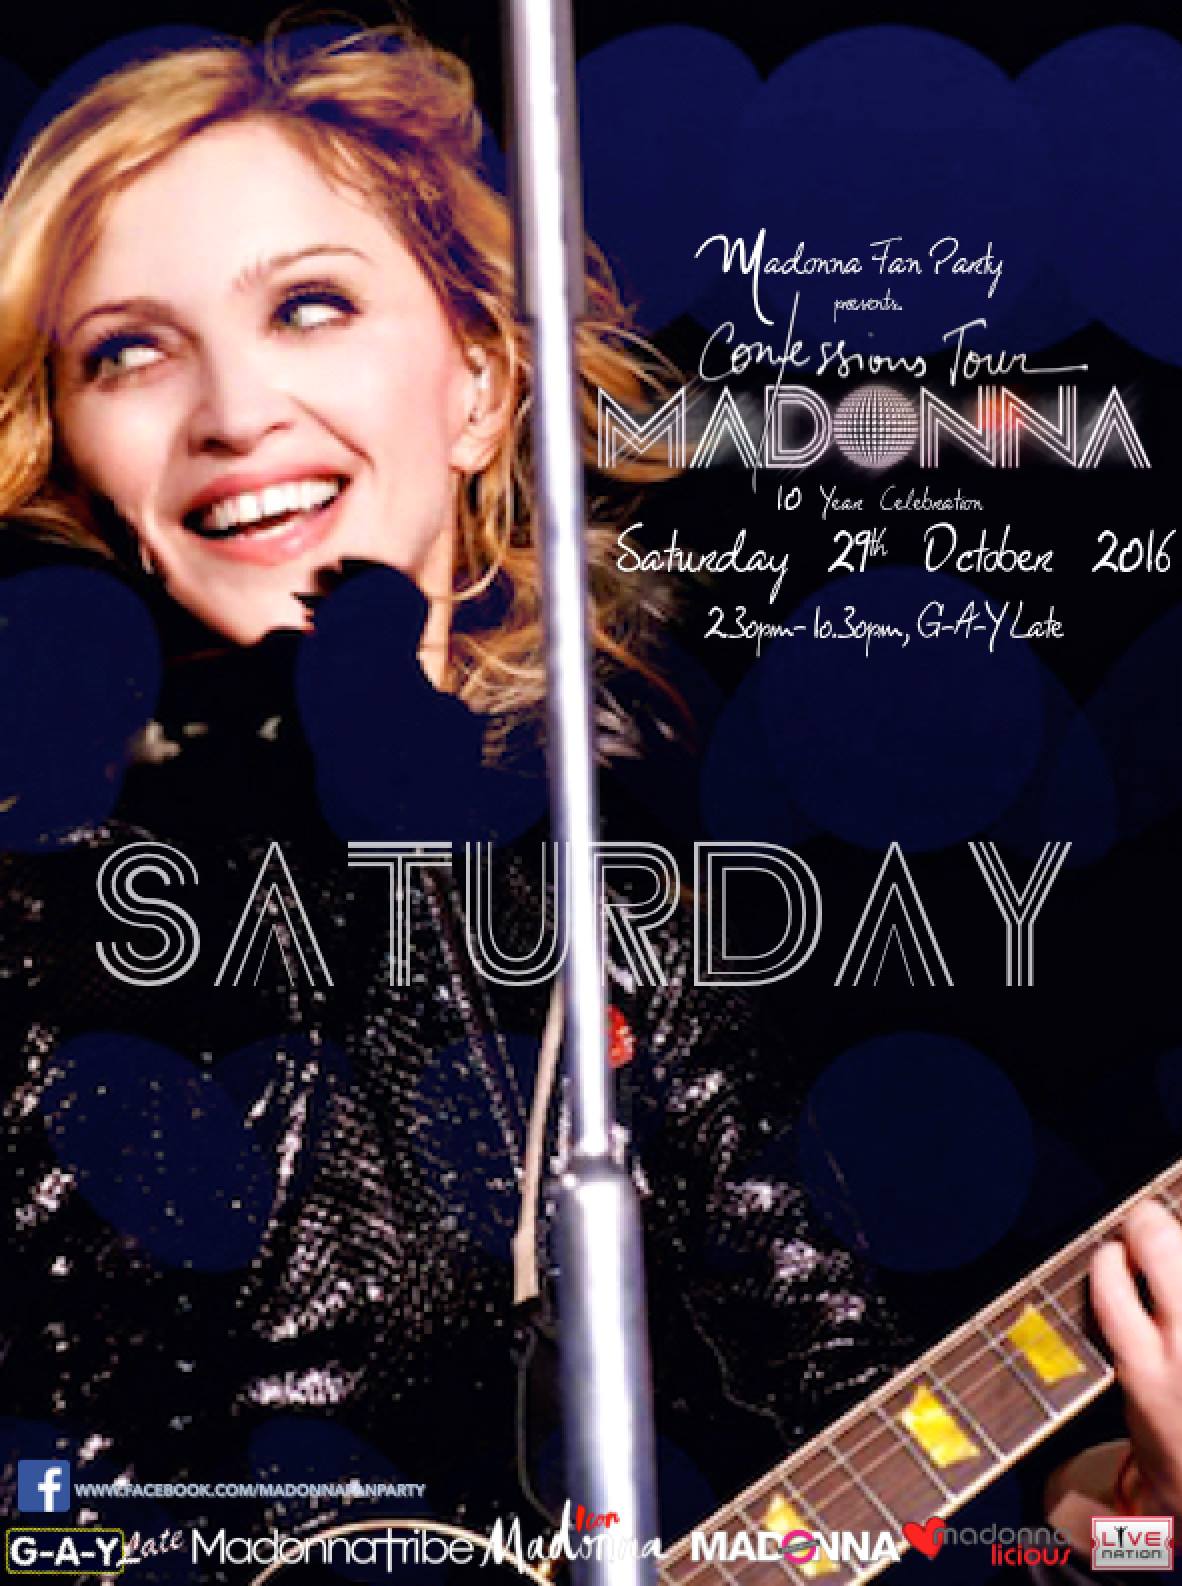 The 26th London Madonna Fan Party